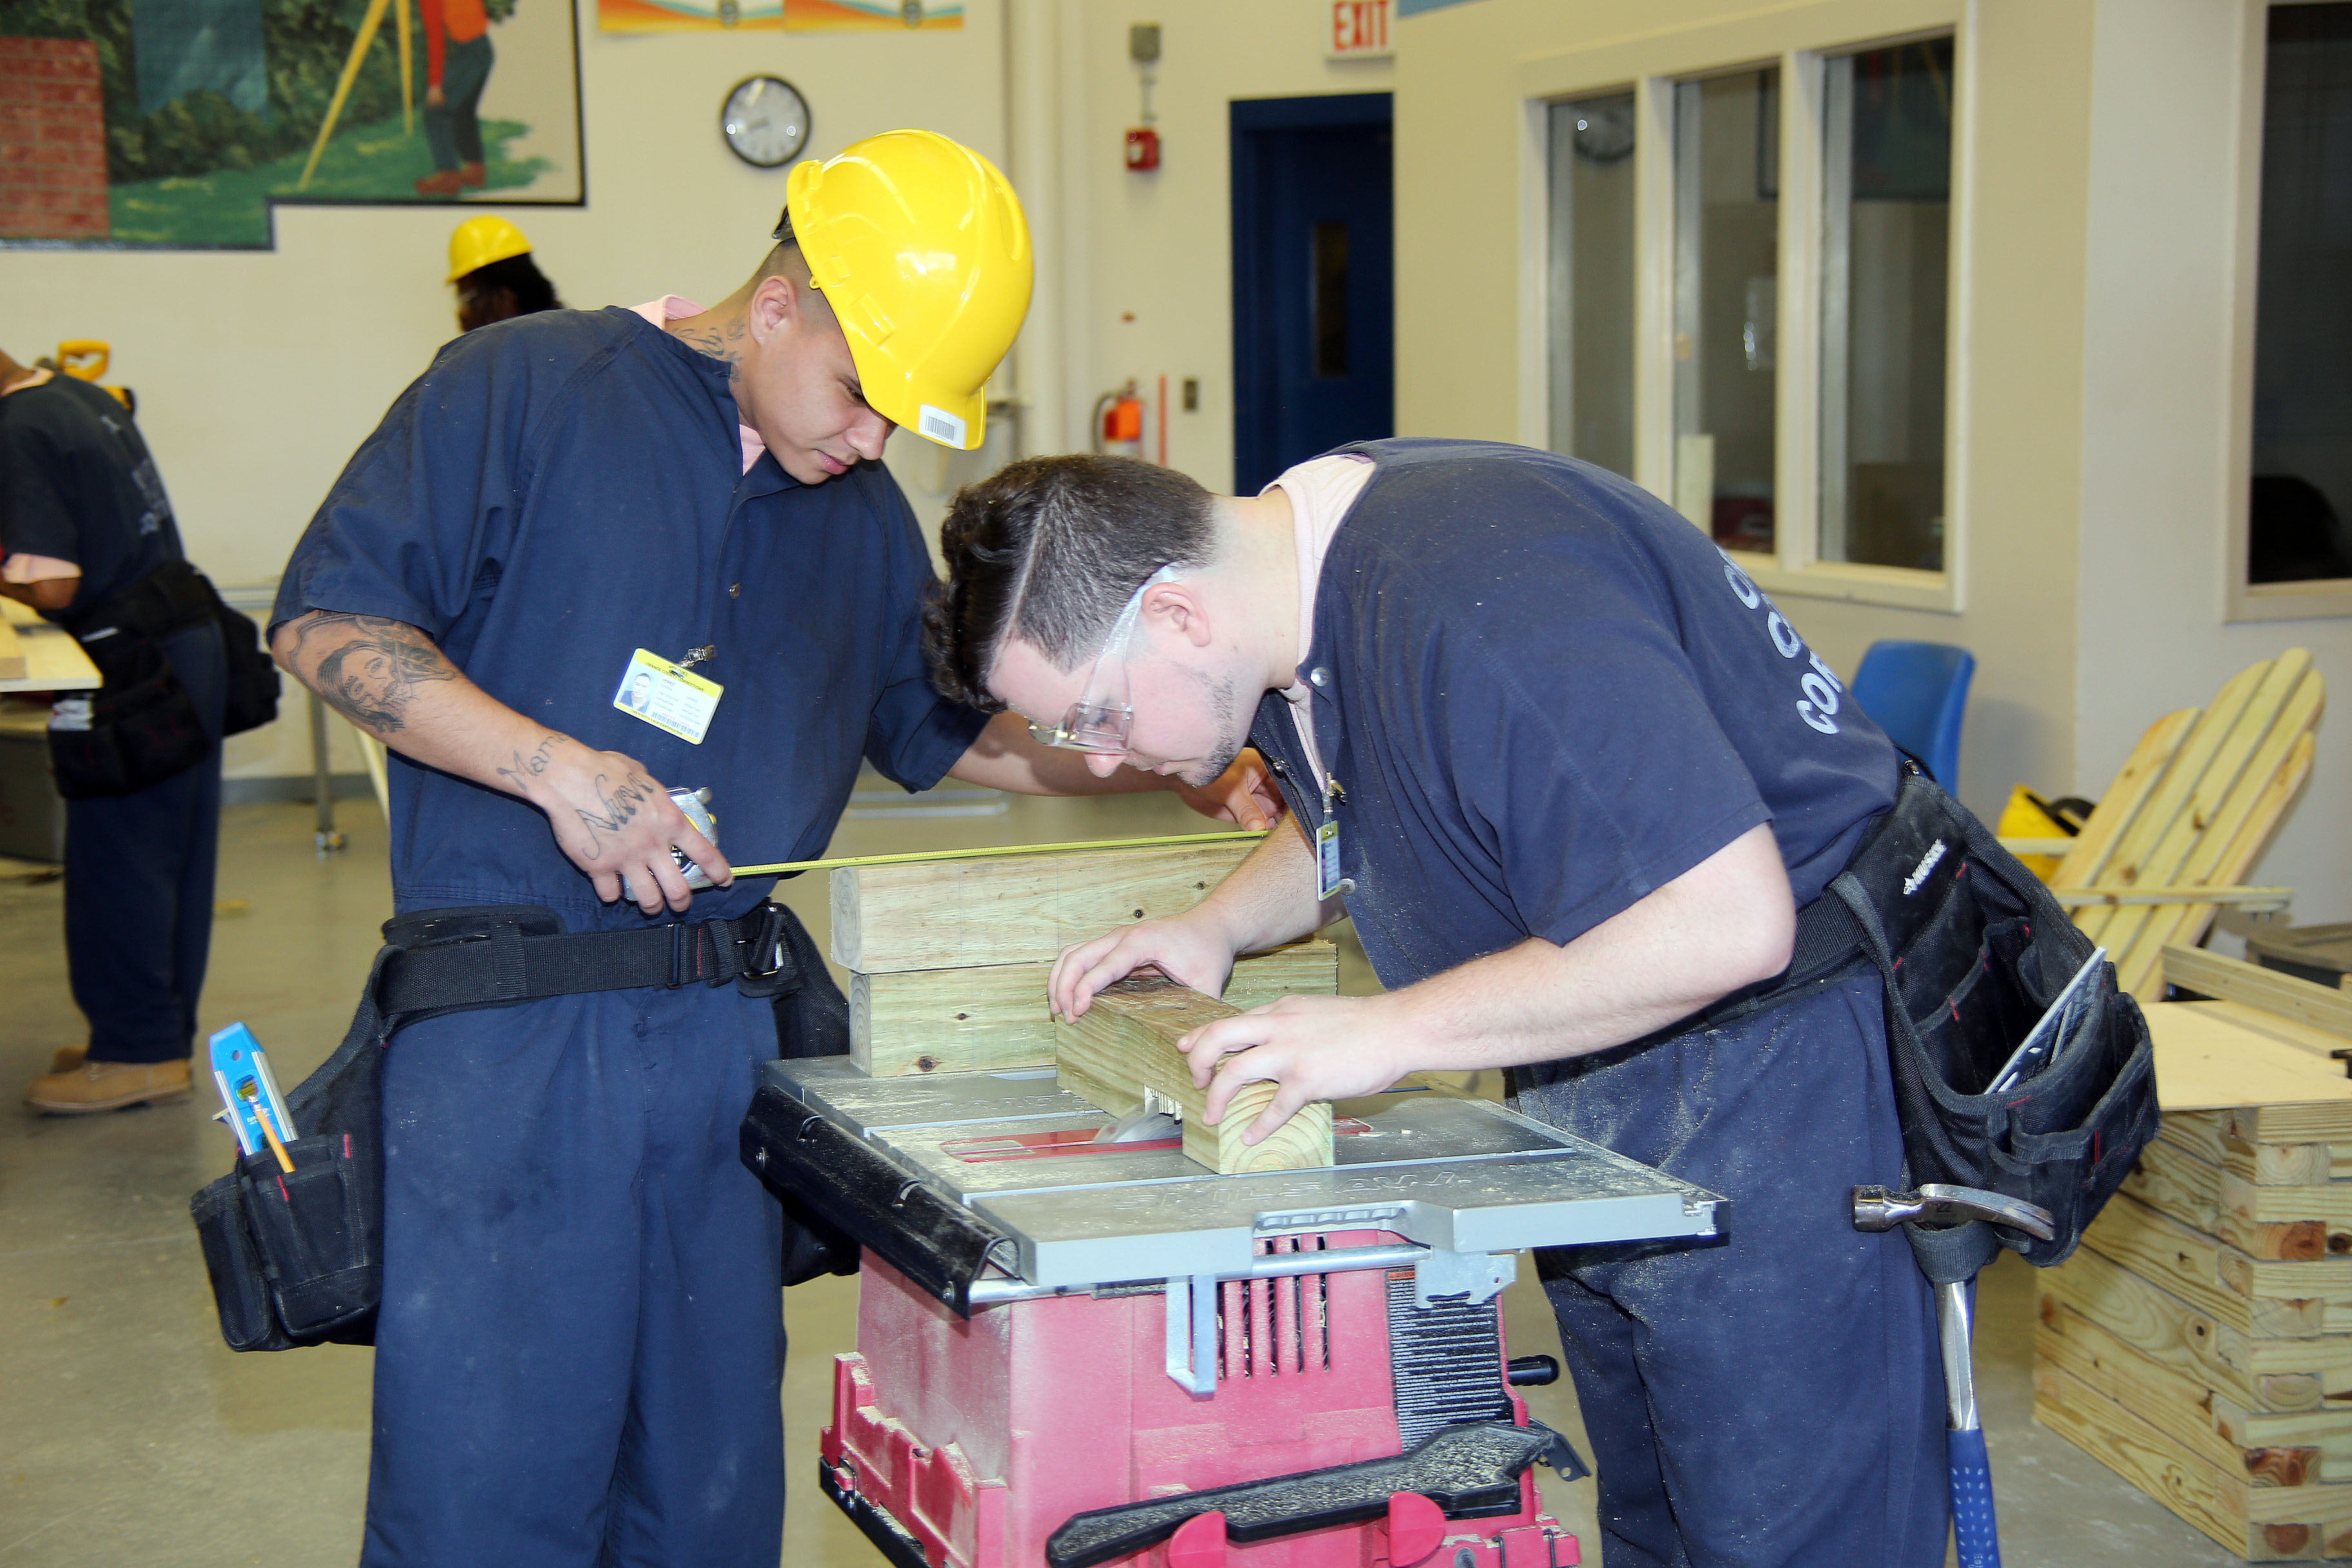 Two male inmates hunched over a woodworking table during their class at the corrections facility. They are intently focused on the project they are working on.